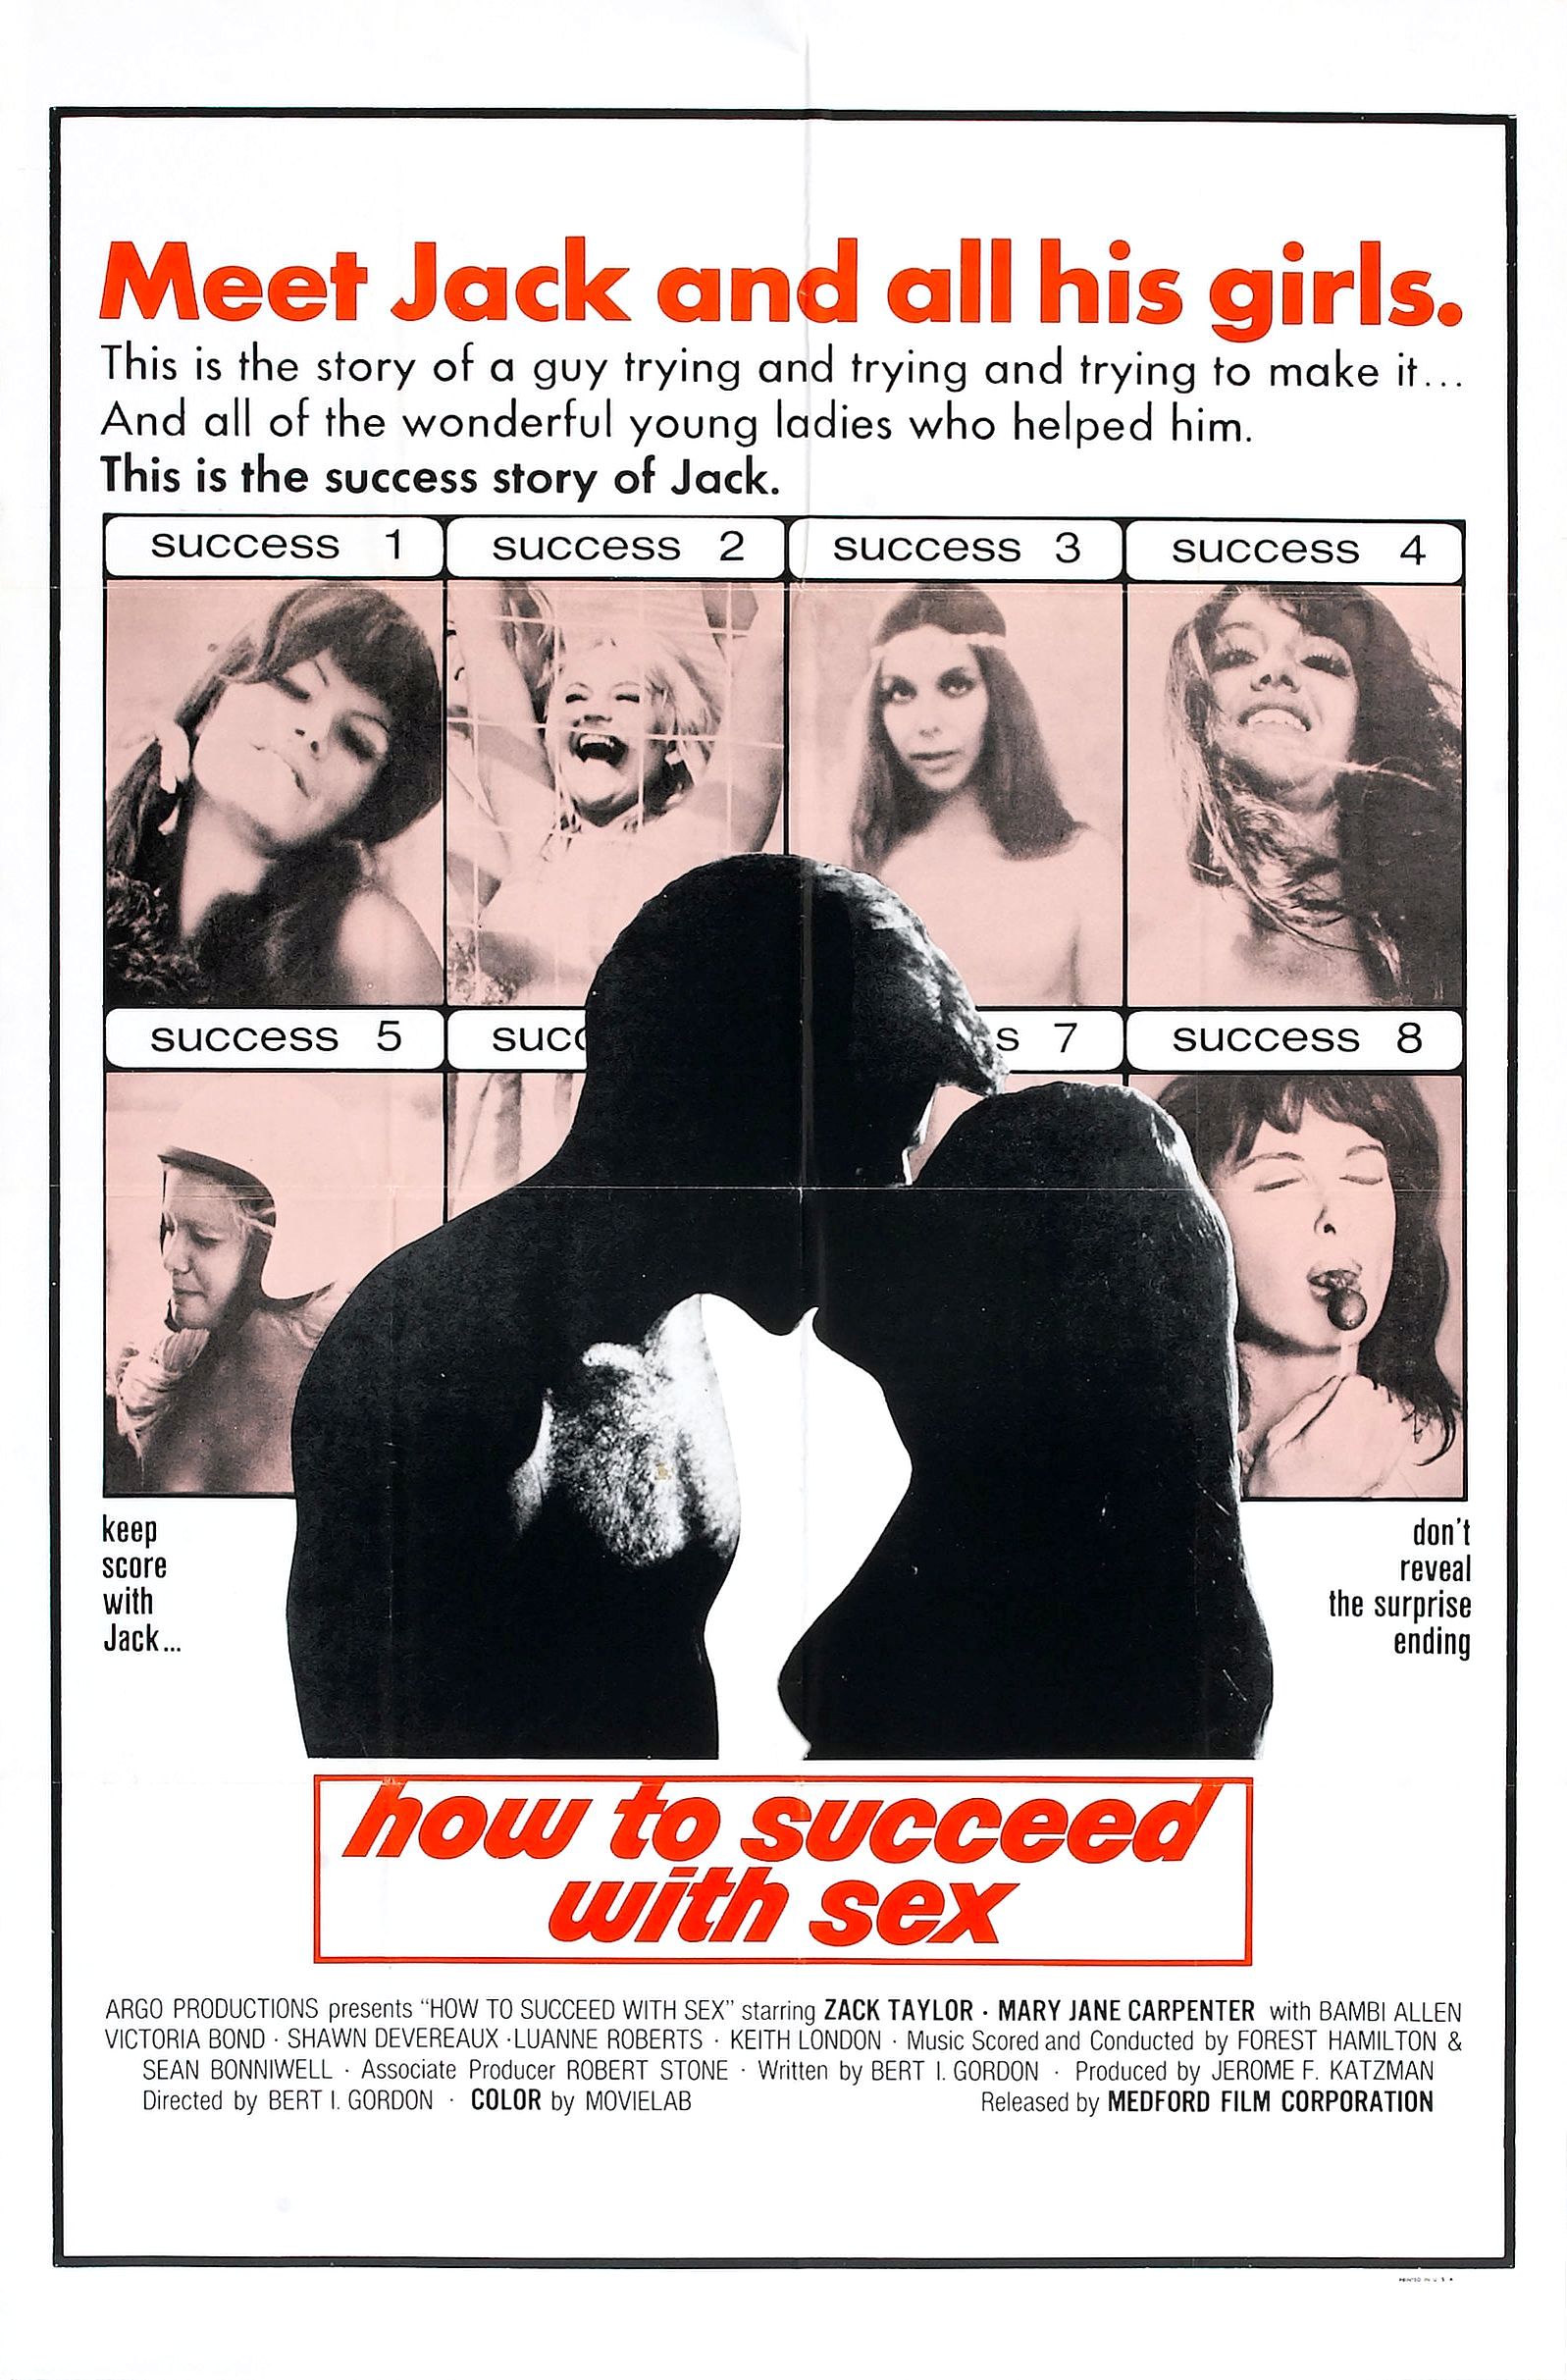 How to Succeed with Sex (1970) Screenshot 2